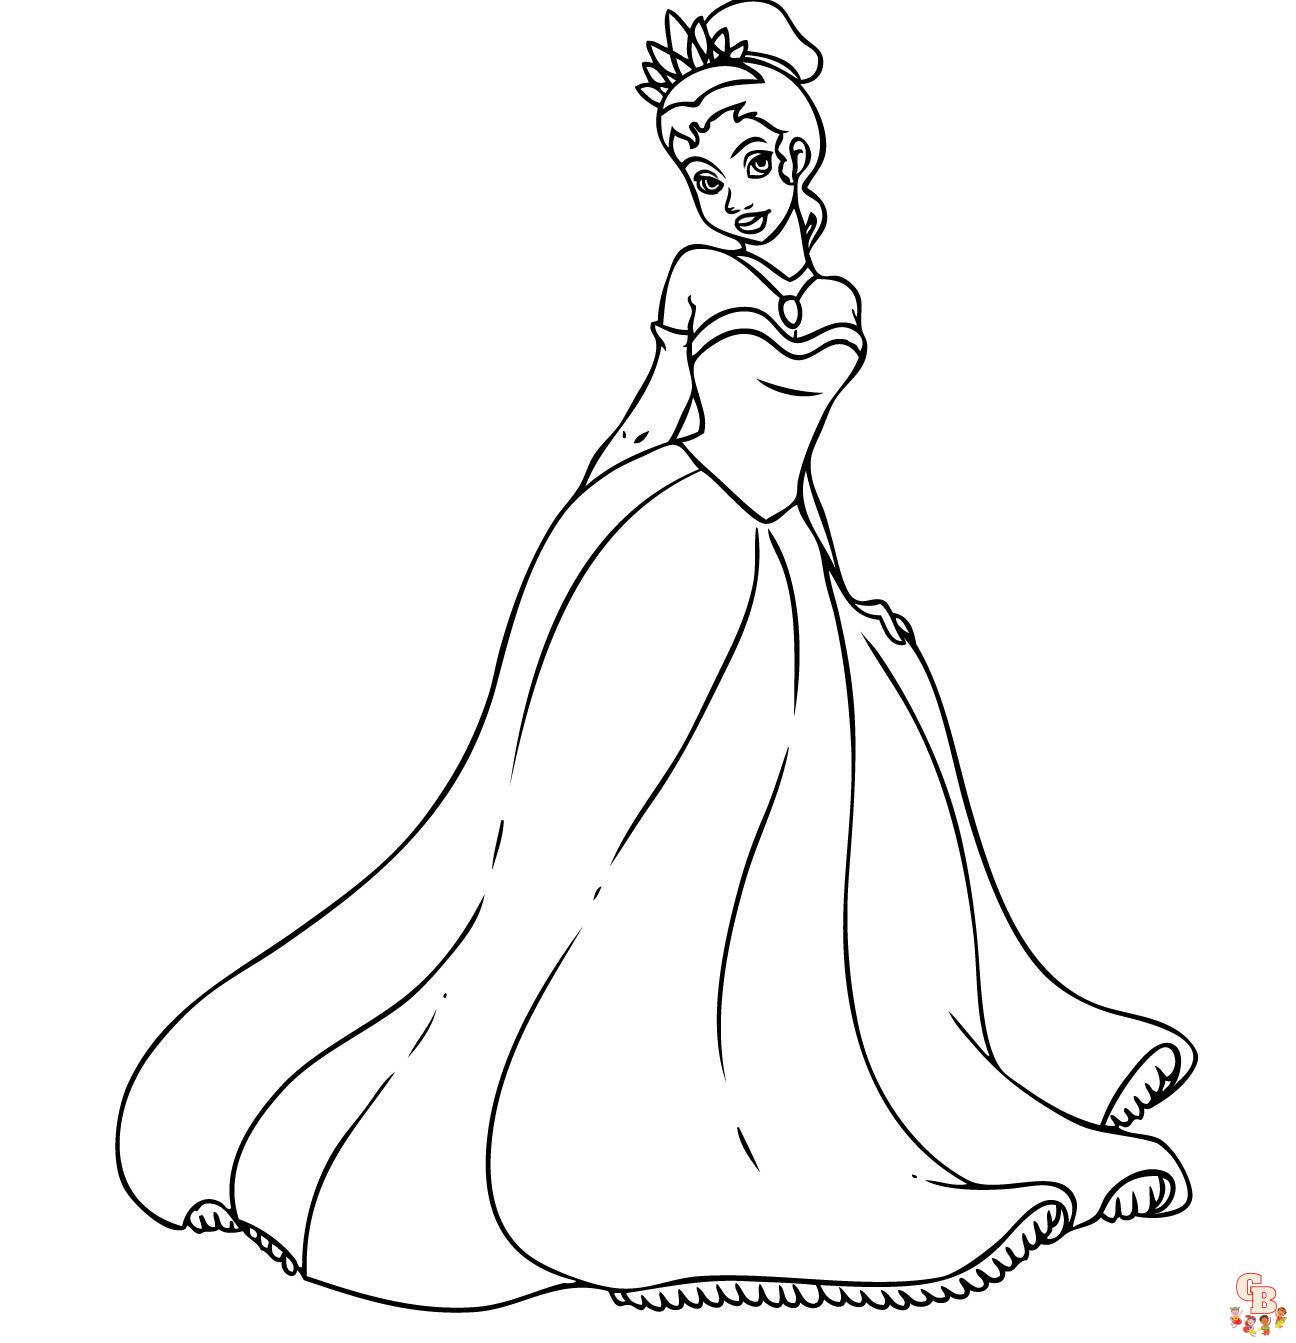 Tiana Princess and the Frog Coloring Pages 2